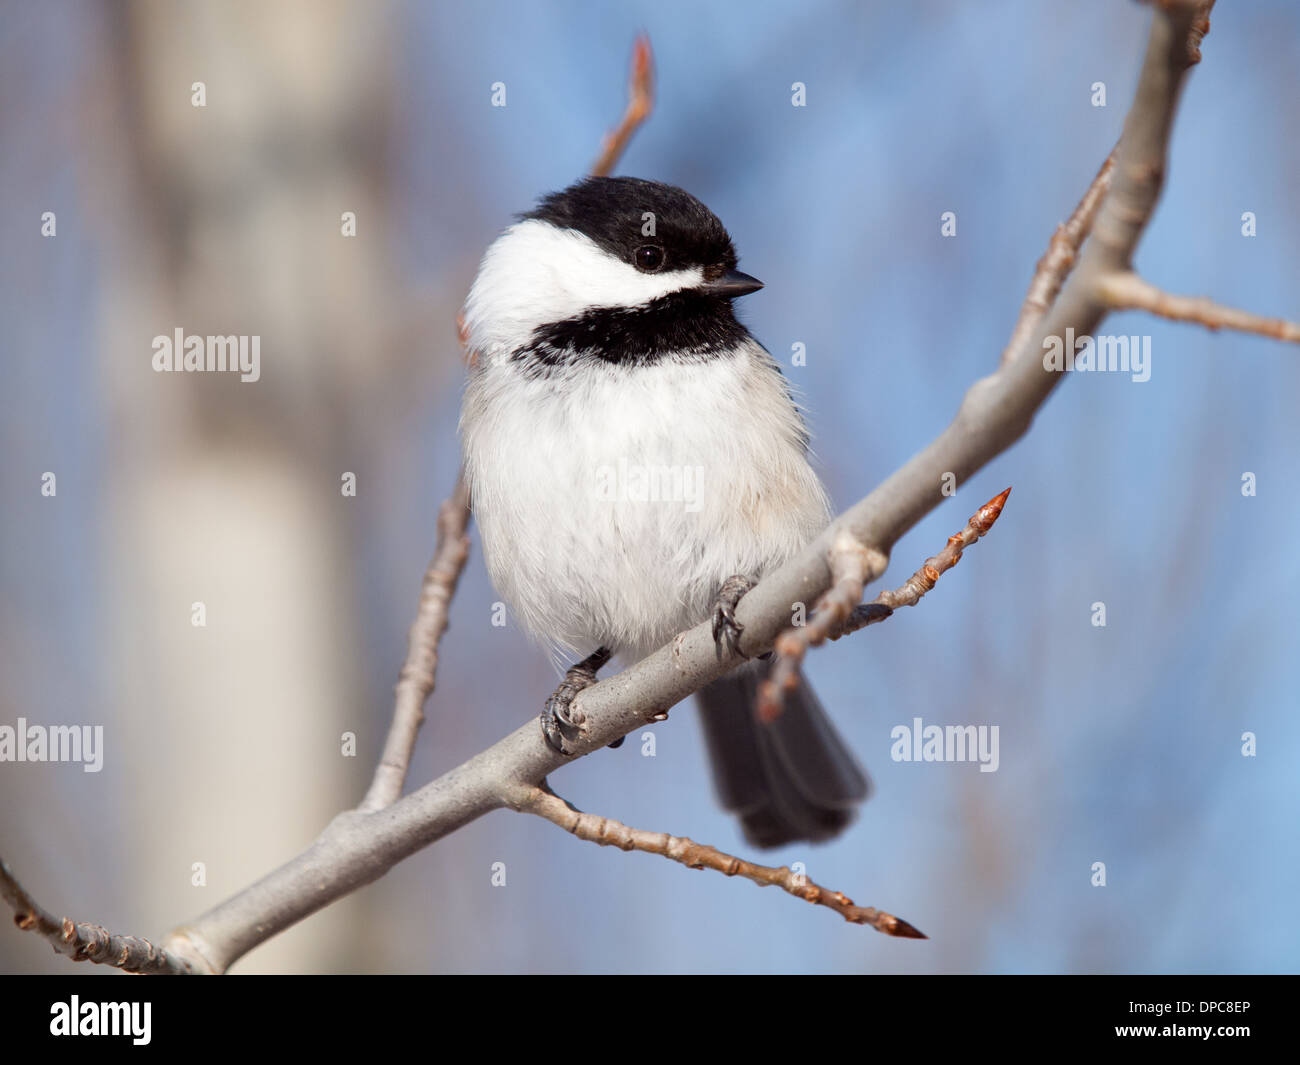 A  Black-capped Chickadee (Poecile atricapillus) at Clifford E. Lee Wildlife Sanctuary in Alberta, Canada. Stock Photo